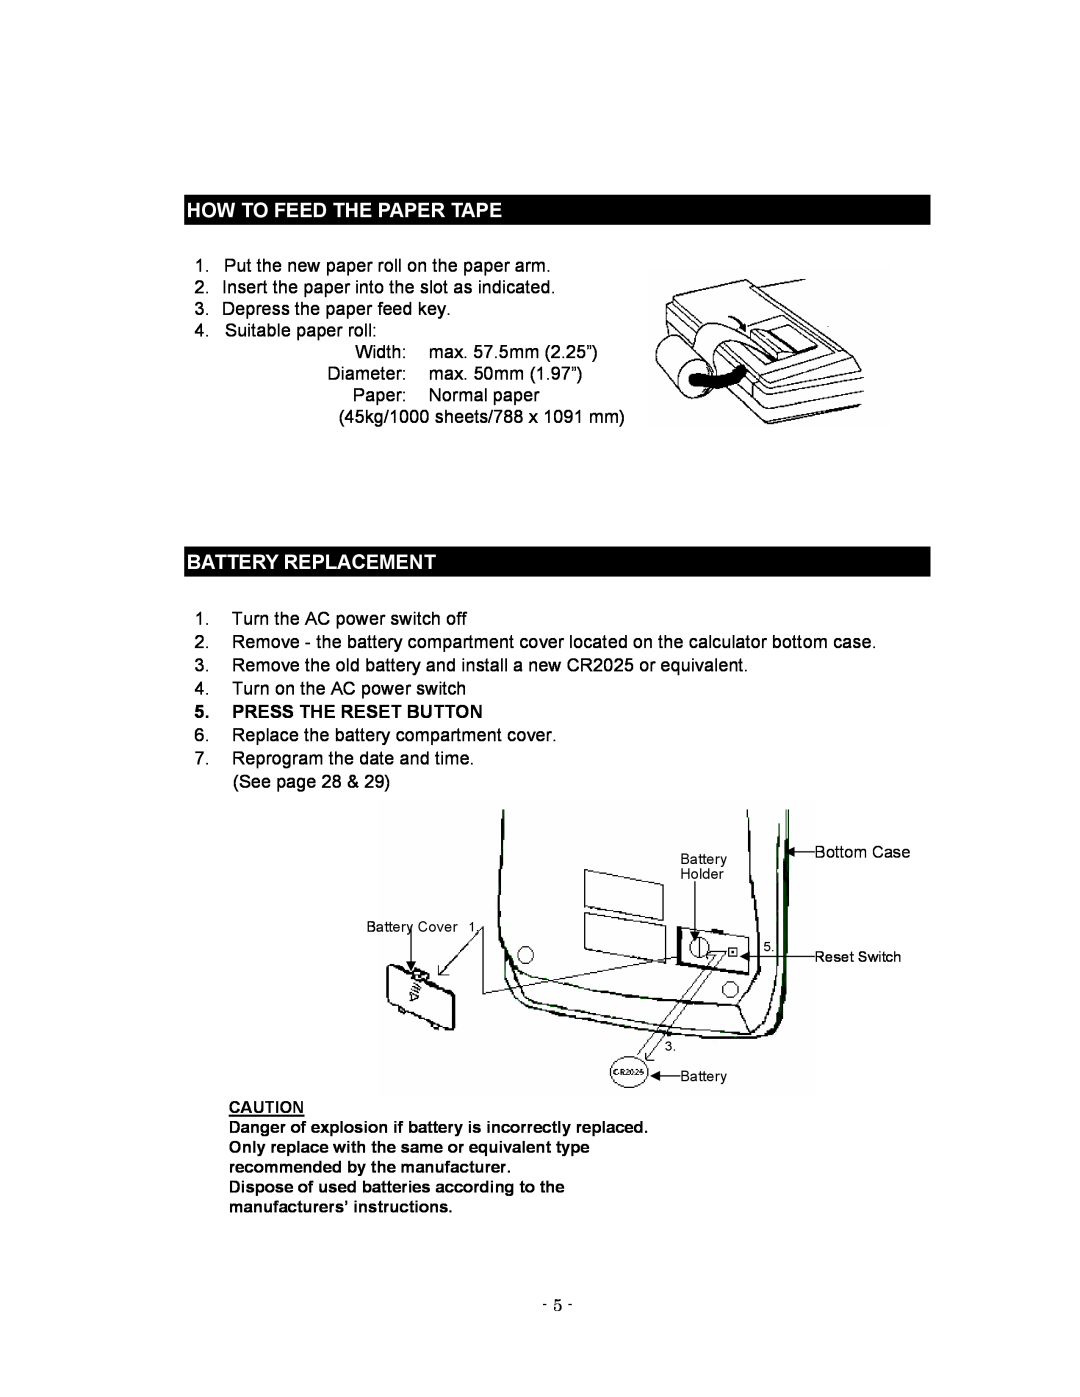 Victor 1280-7 USB manual How To Feed The Paper Tape, Battery Replacement, Press The Reset Button 